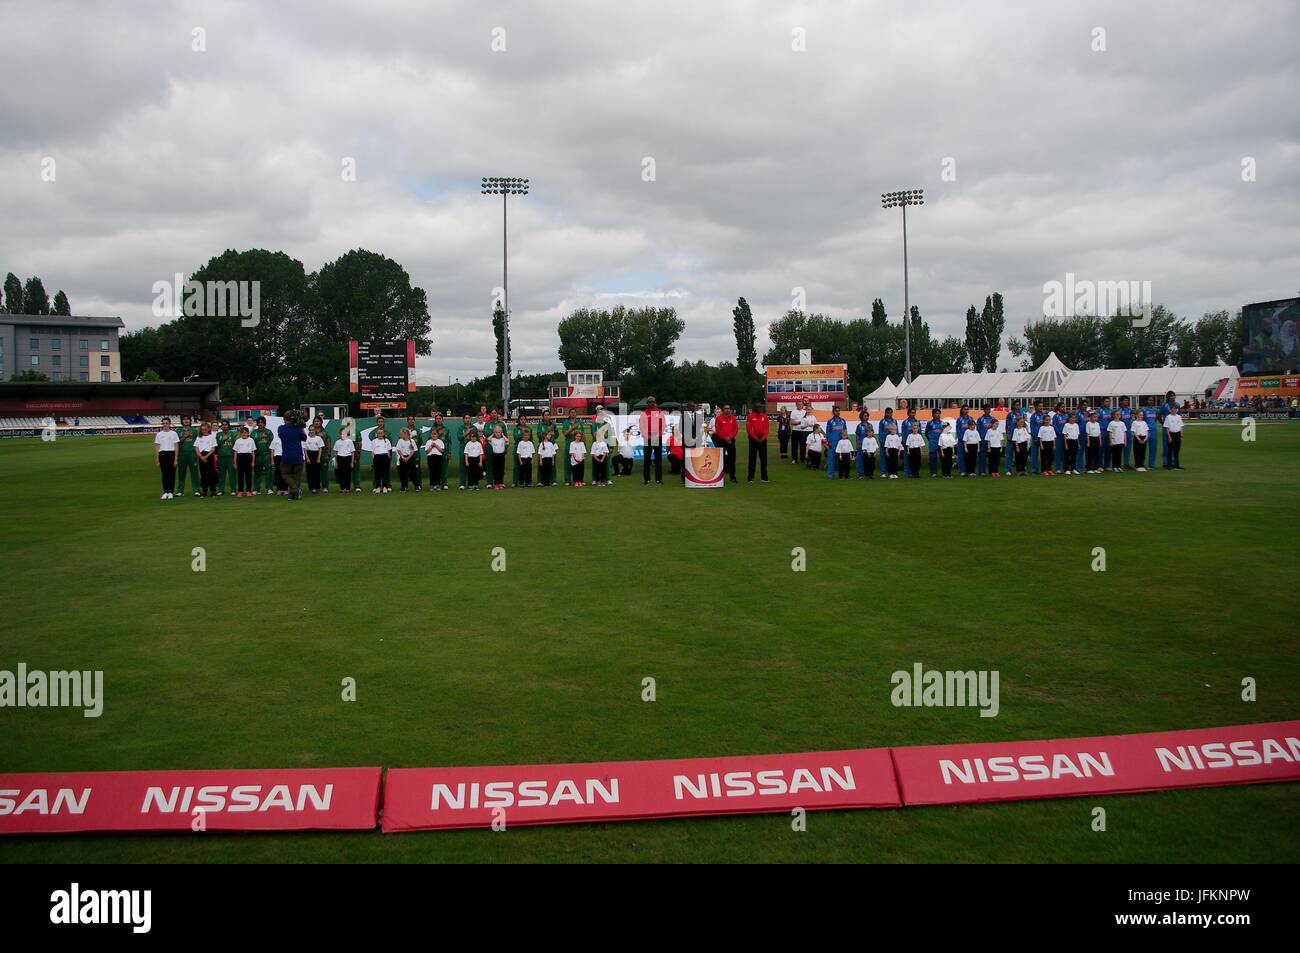 Derby, England, 02nd July 2017. The Indian and Pakistan teams line up for the national anthems before their match in the ICC Women’s World Cup at the County Ground Derby. Credit: Colin Edwards/Alamy Live News. Stock Photo